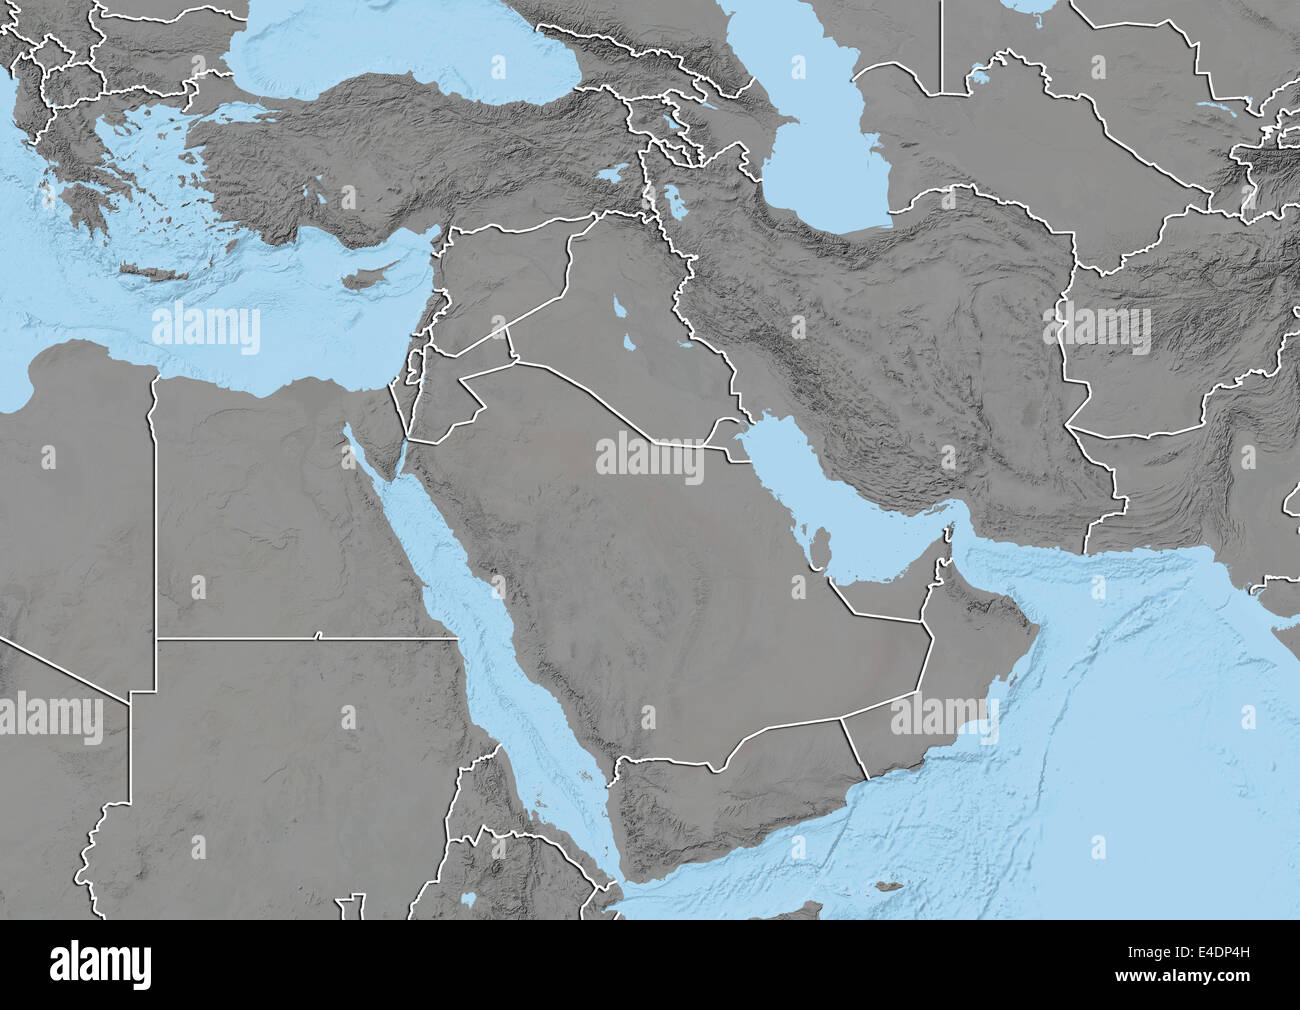 Middle East, Relief Map With Country Borders Stock Photo